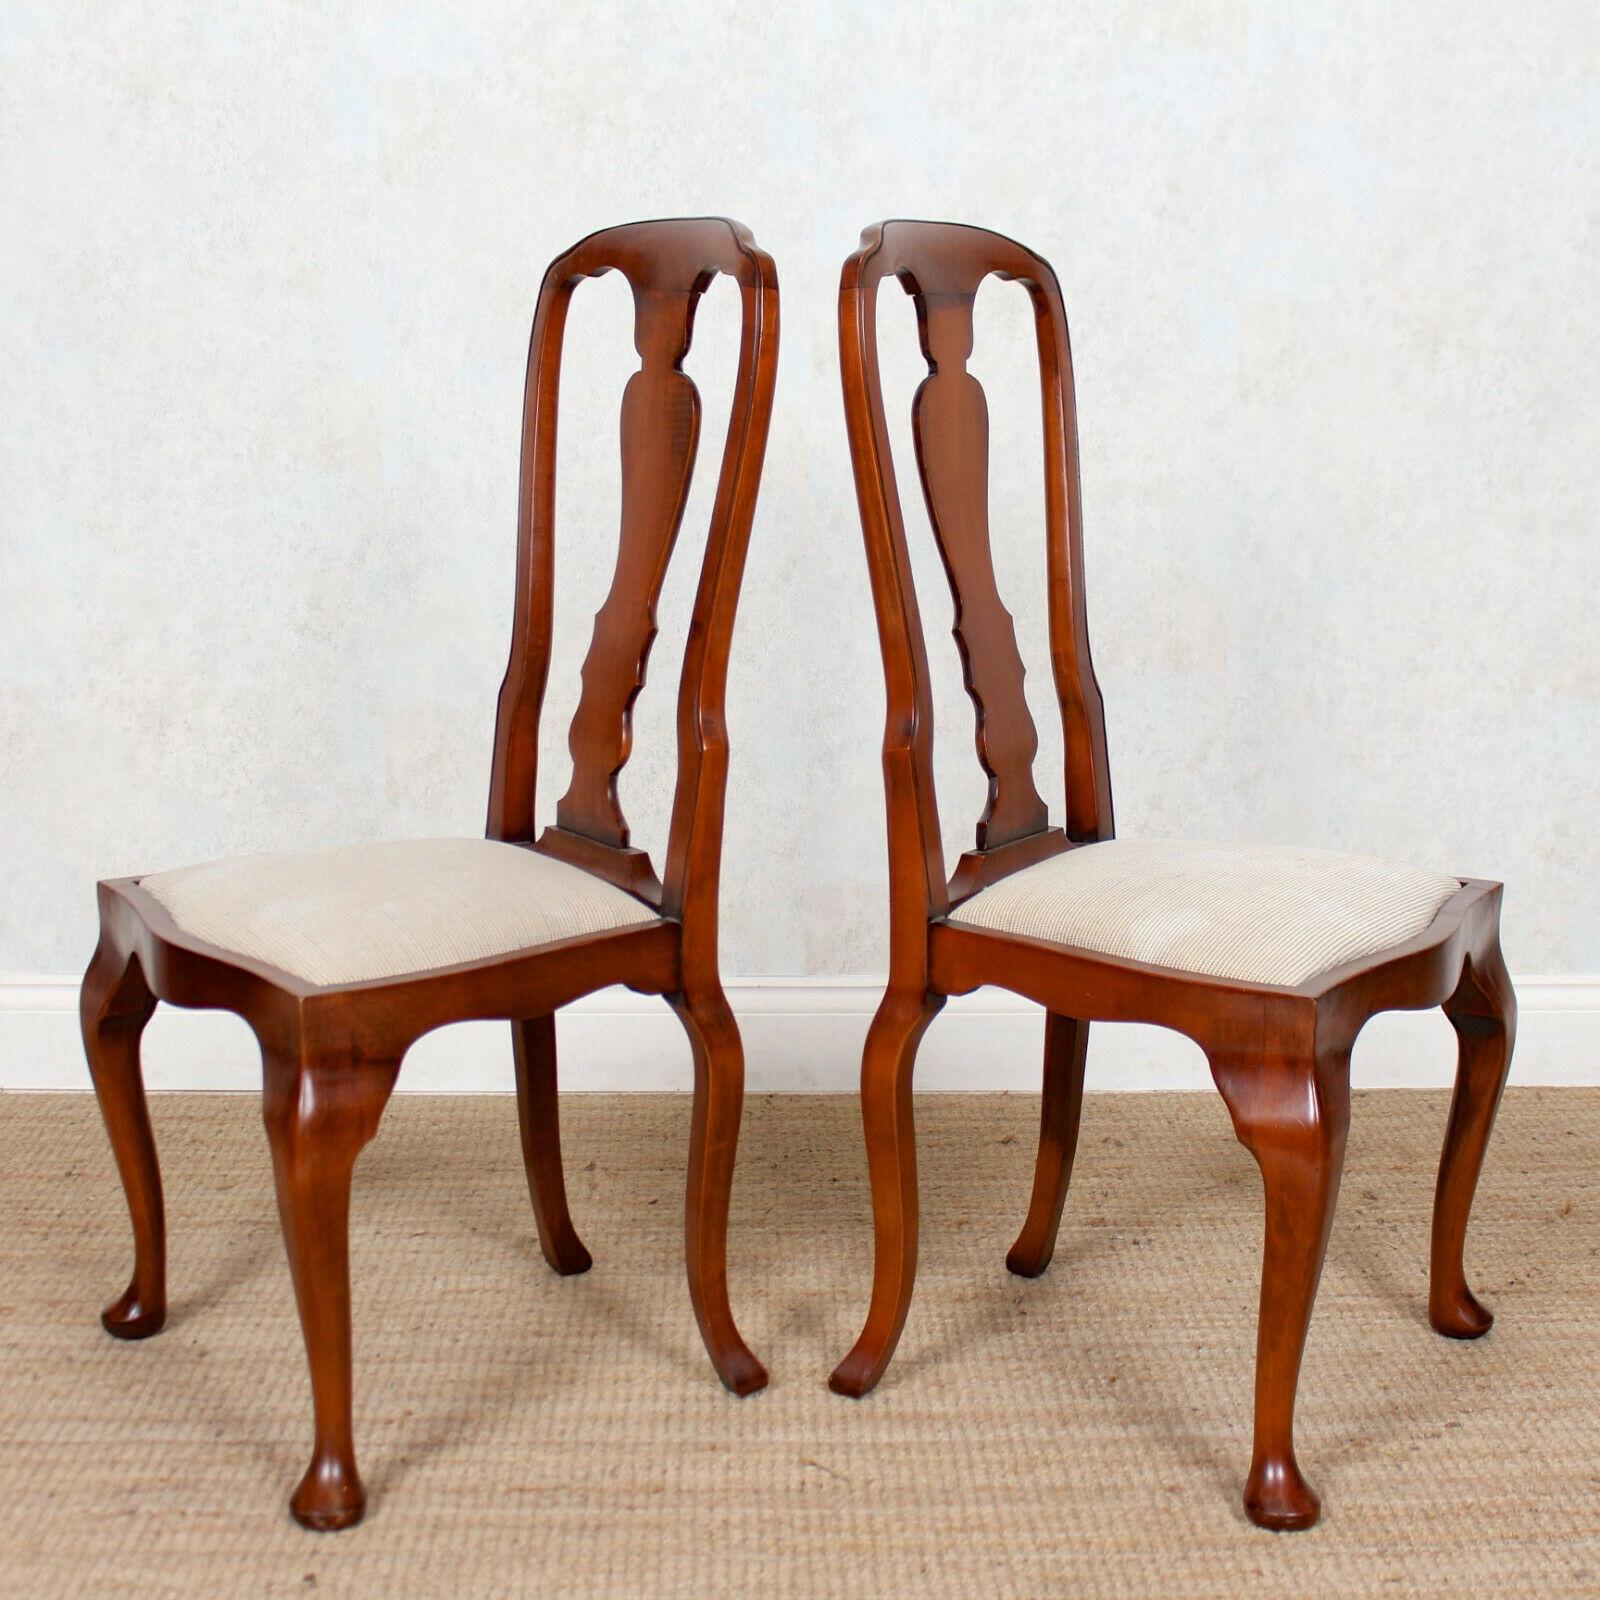 Mahogany 6 English Queen Anne Dining Chairs Antique Vintage